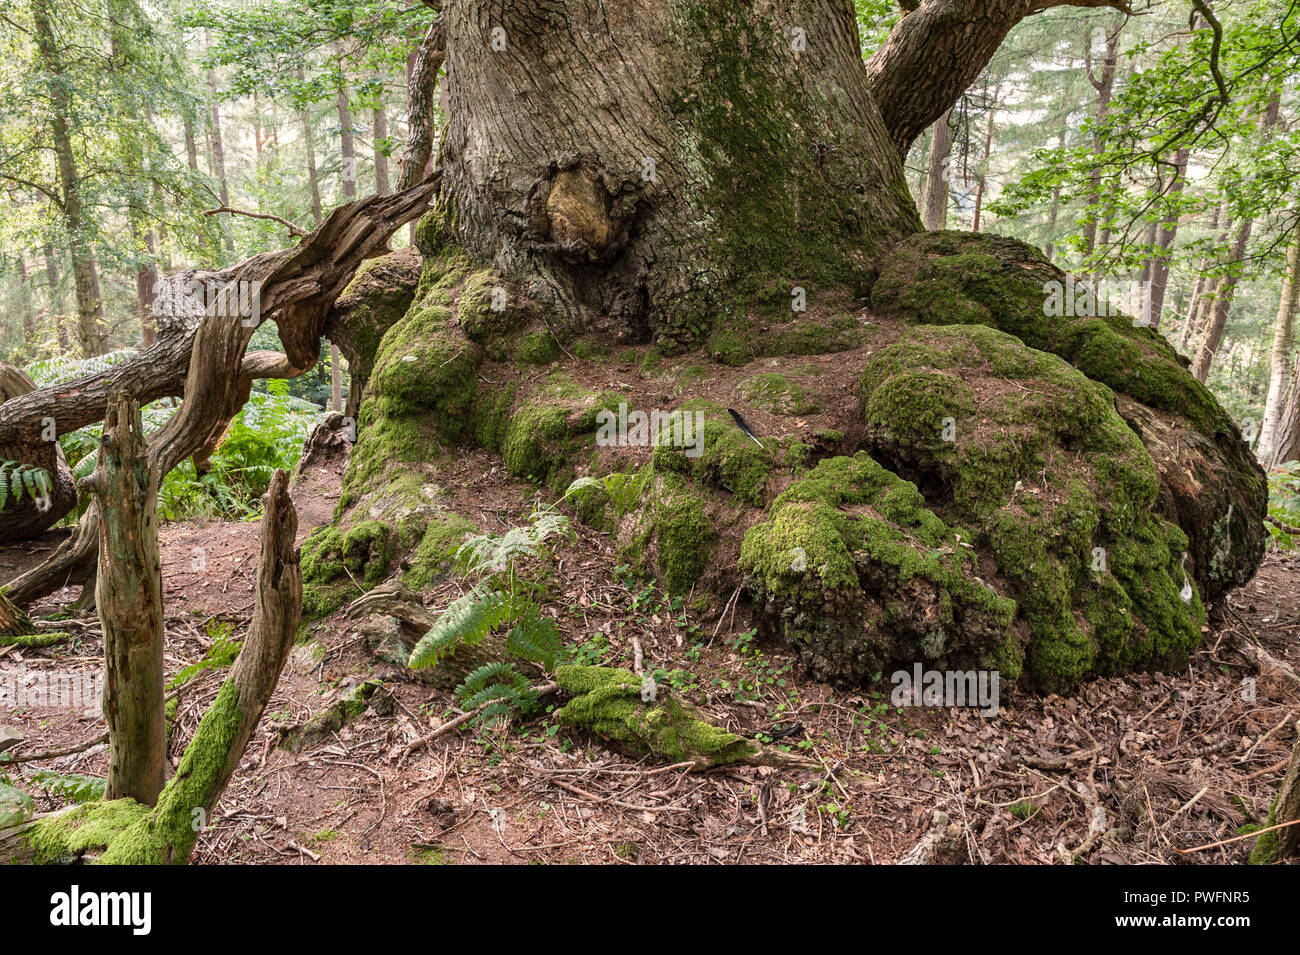 Herefordshire, UK. A huge and ancient oak tree preserved in a new forestry plantation Stock Photo